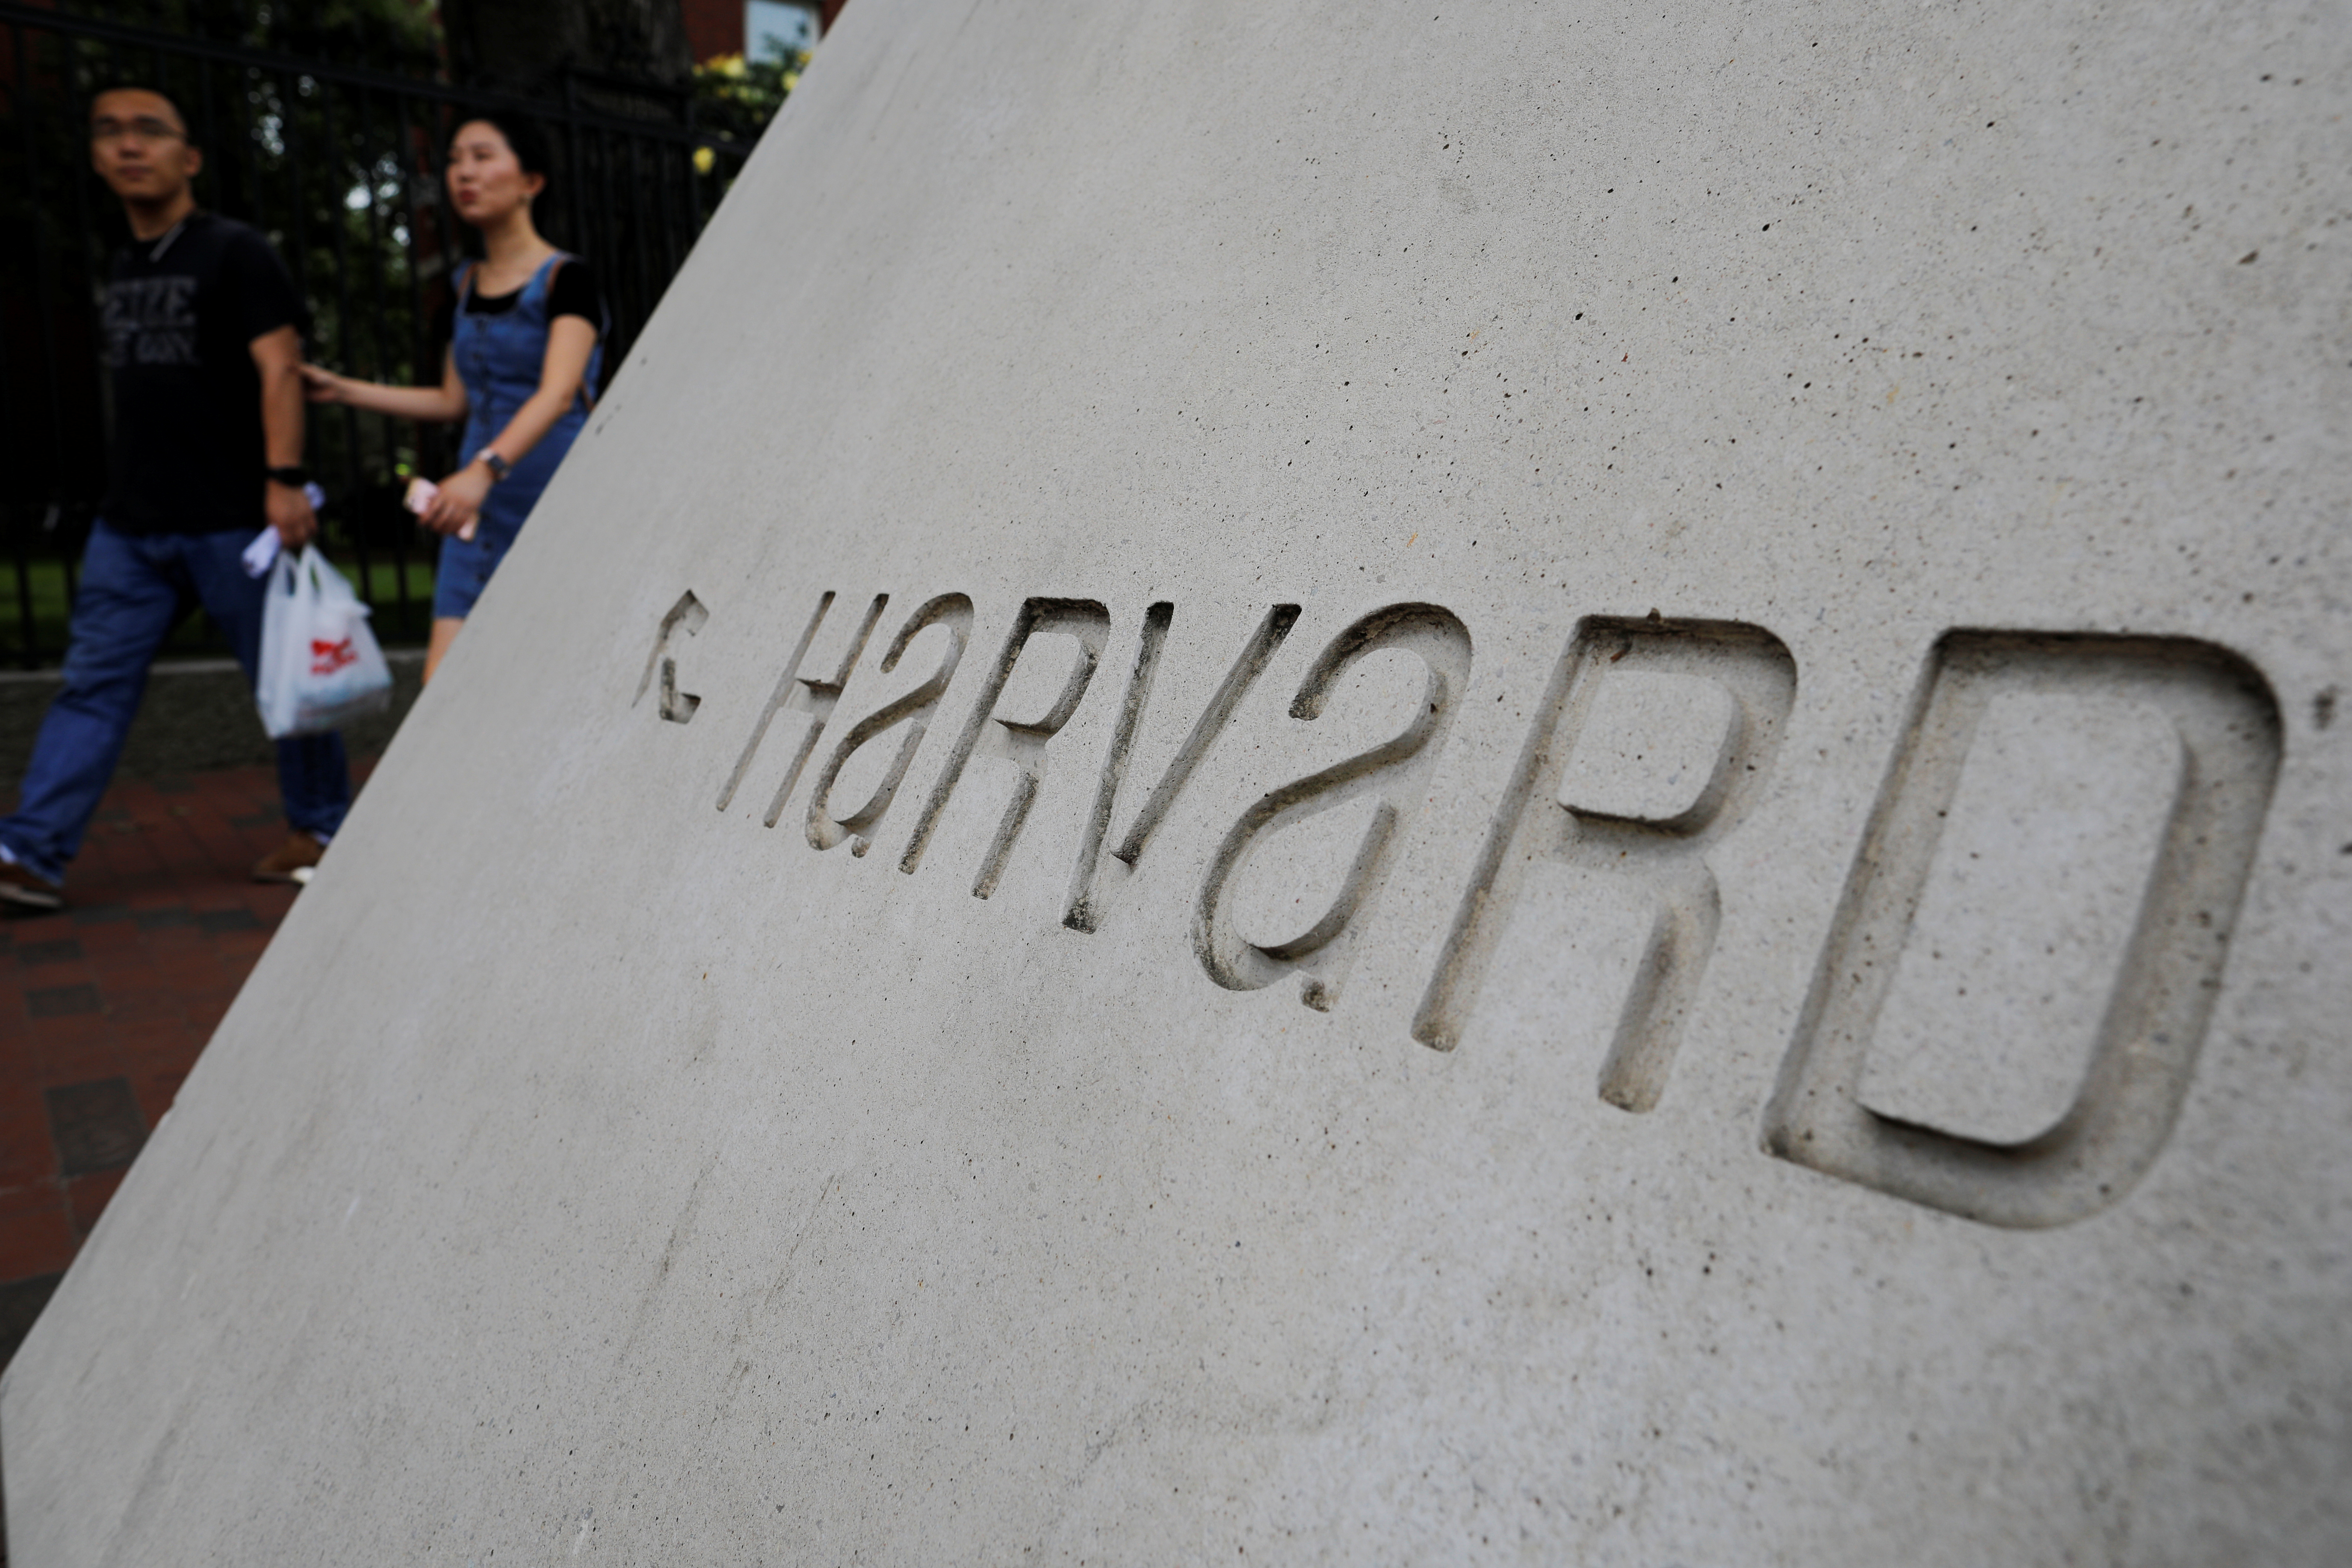 Pedestrians walk past a sign for Harvard Square outside Harvard University in Cambridge